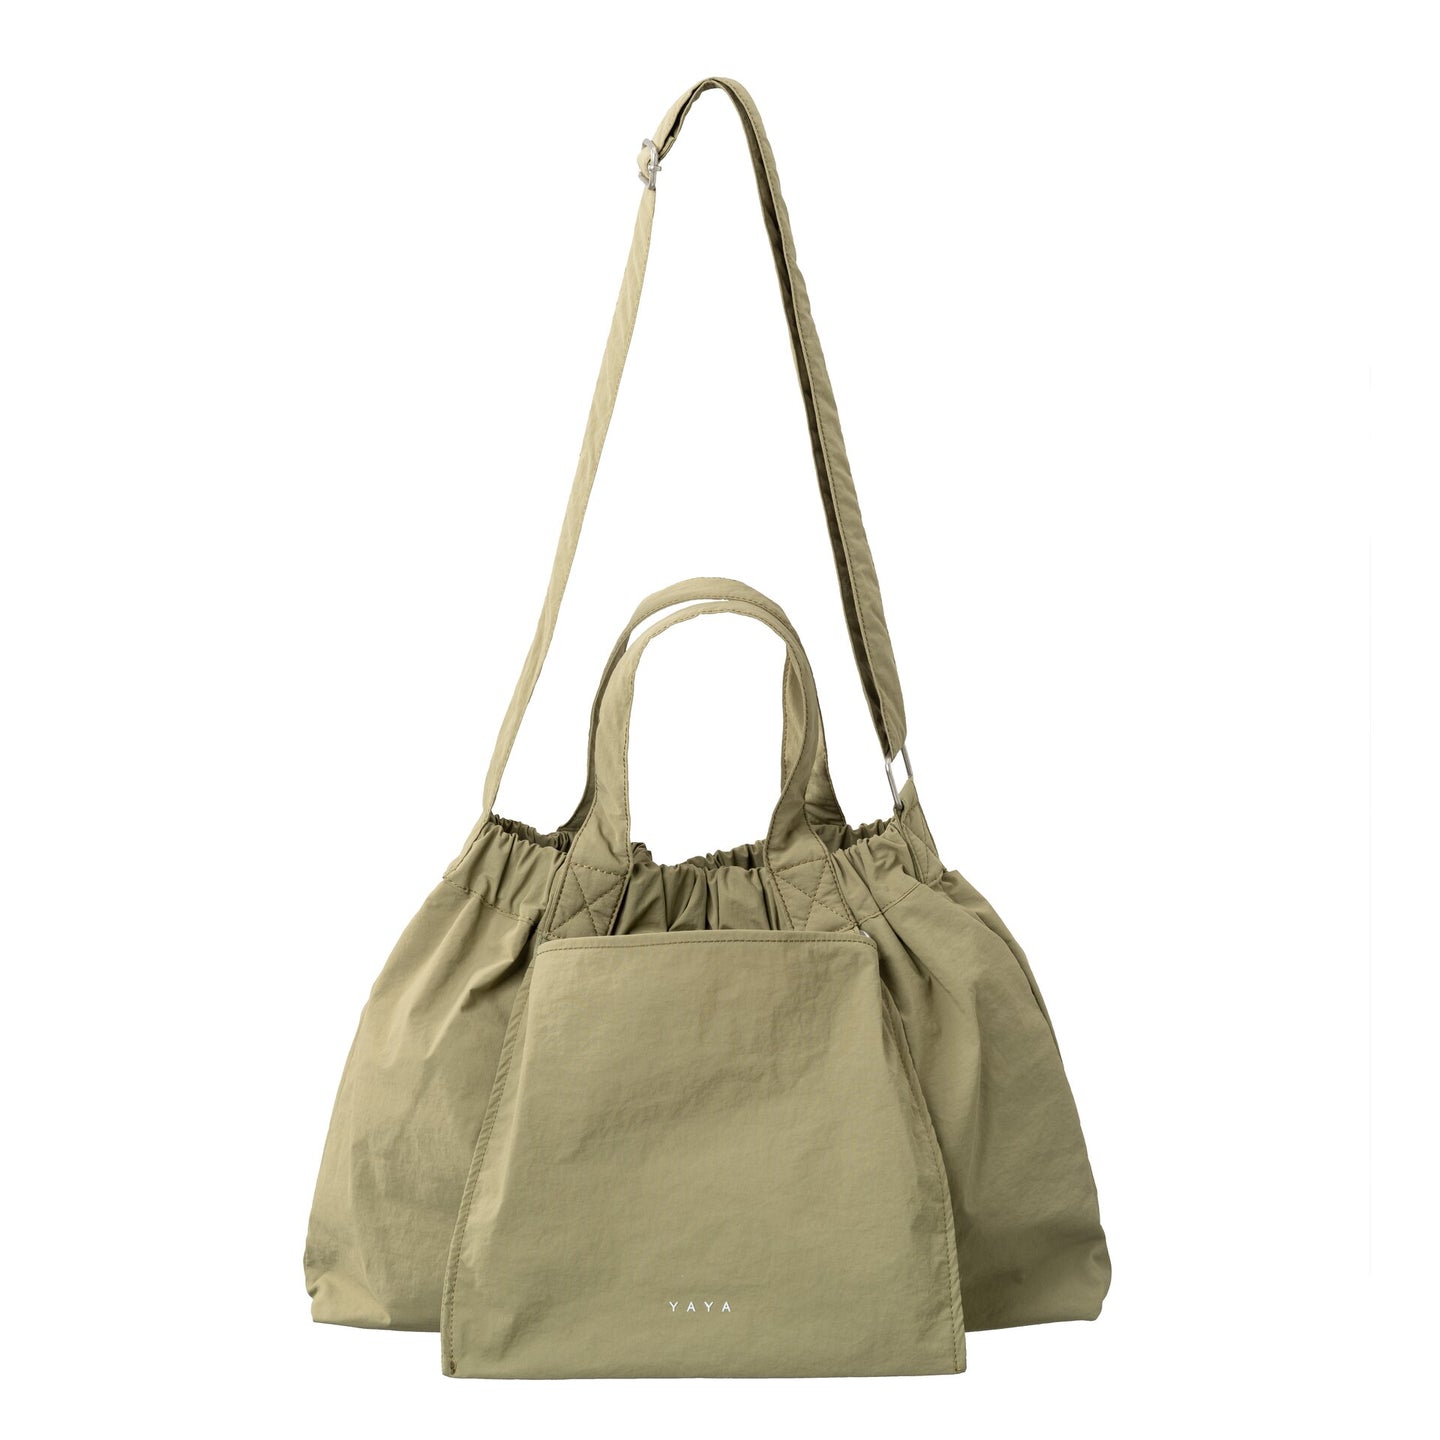 YAYA - Sports shoulder bag with strap and side pockets Eucalyptus Green